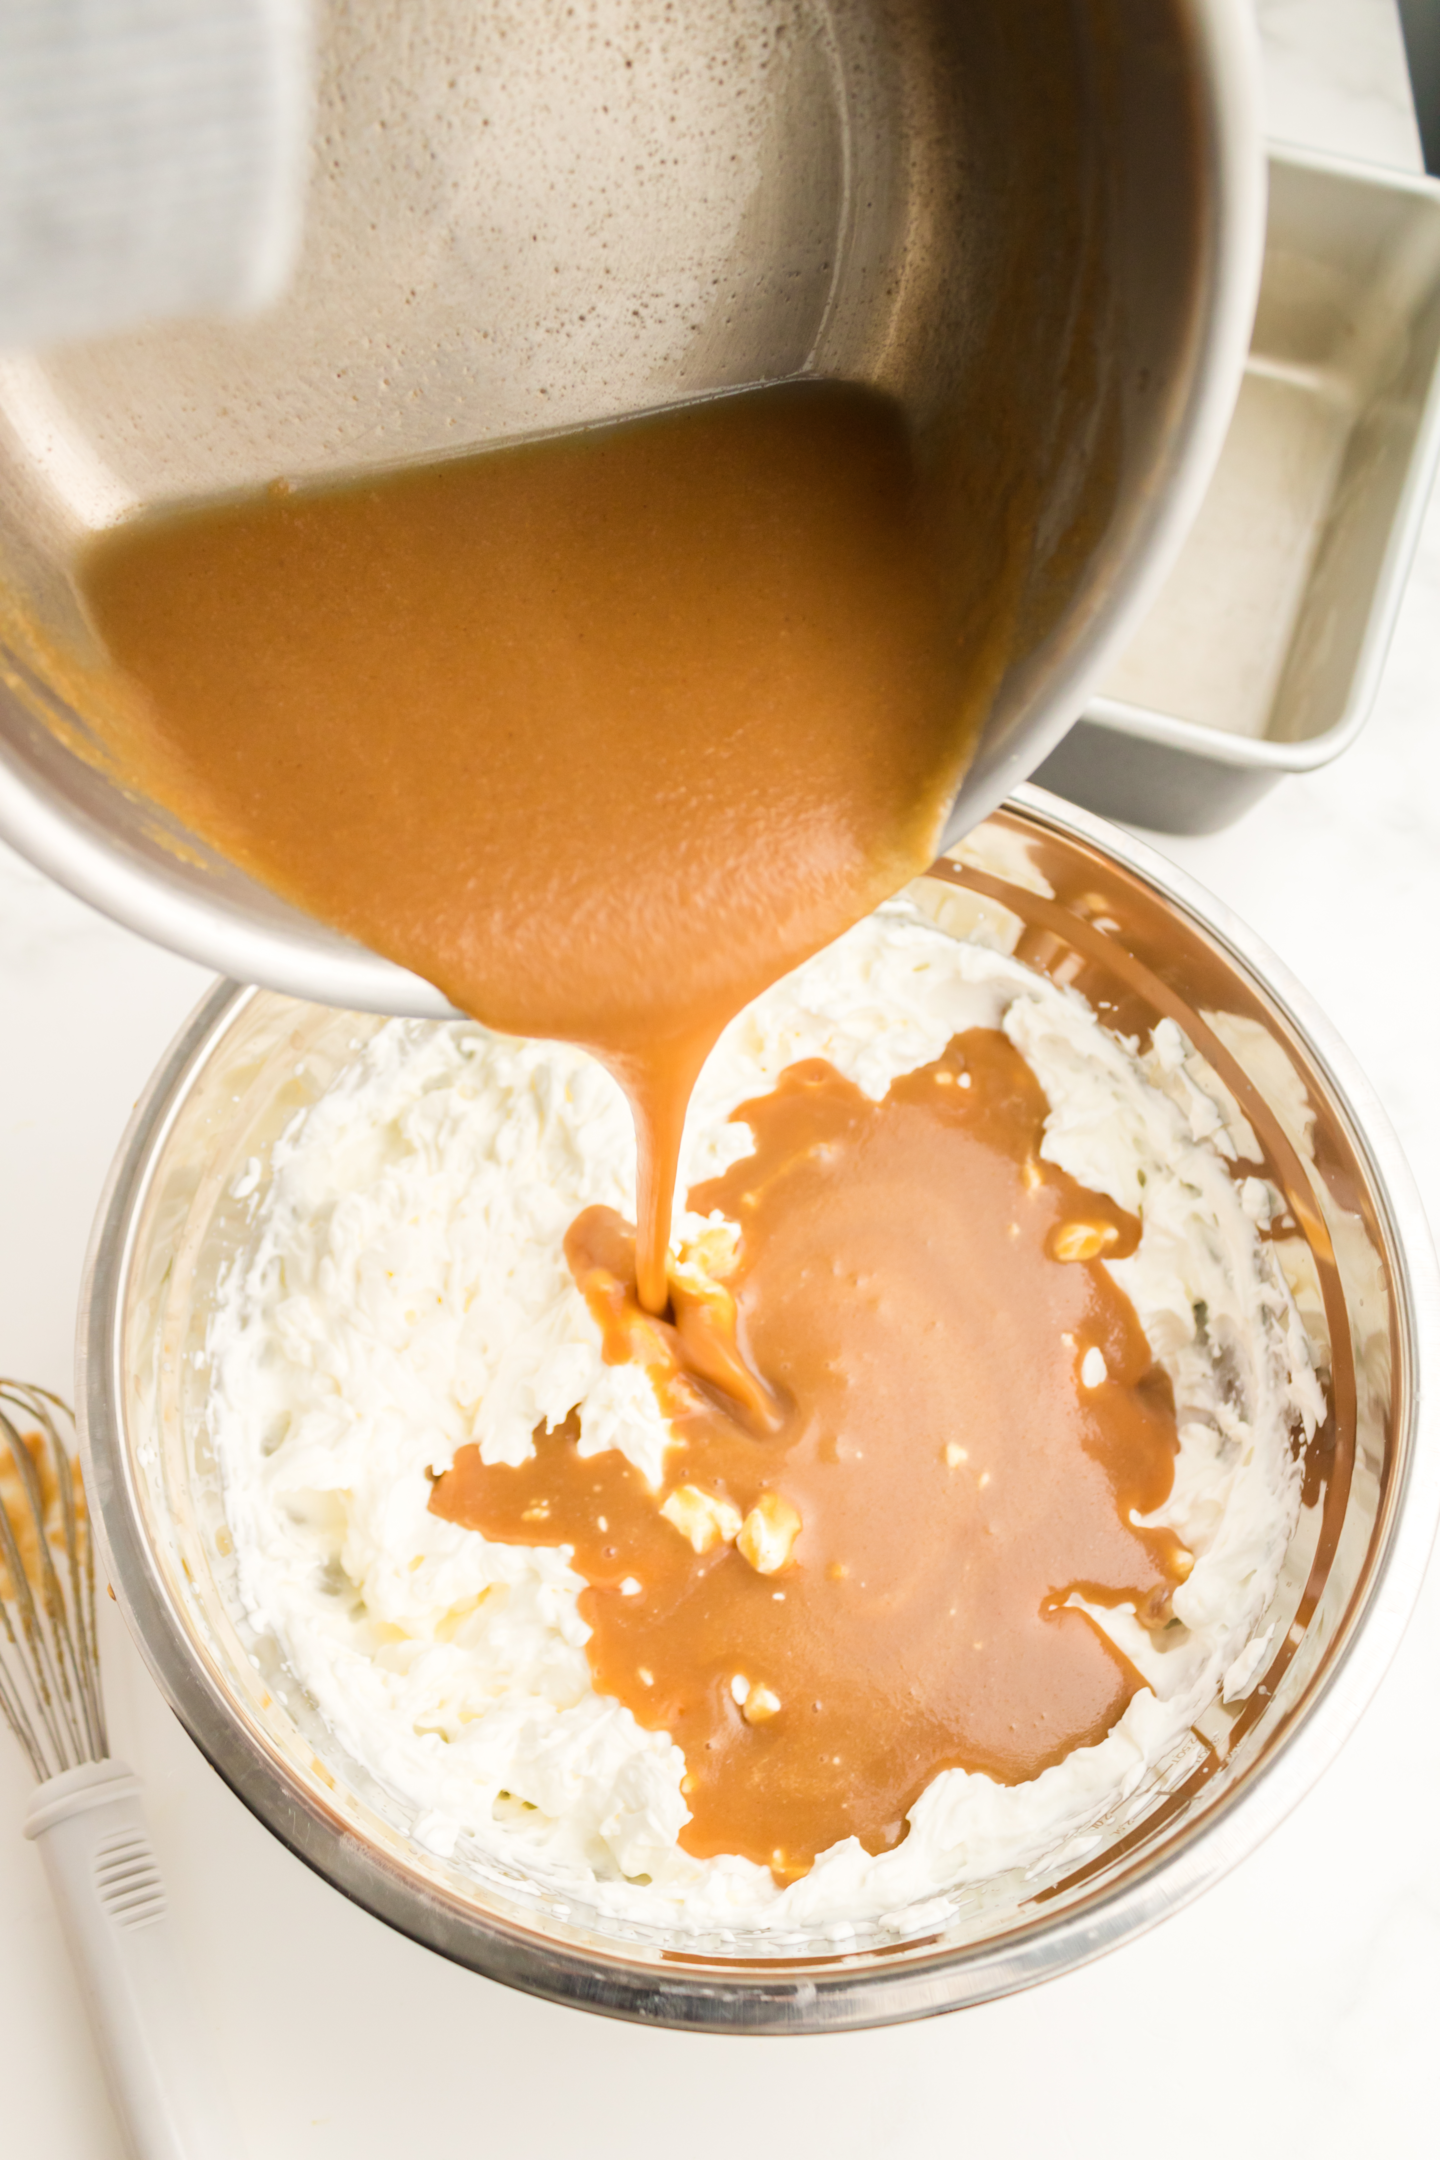 peanut butter mixture poured into whipped cream